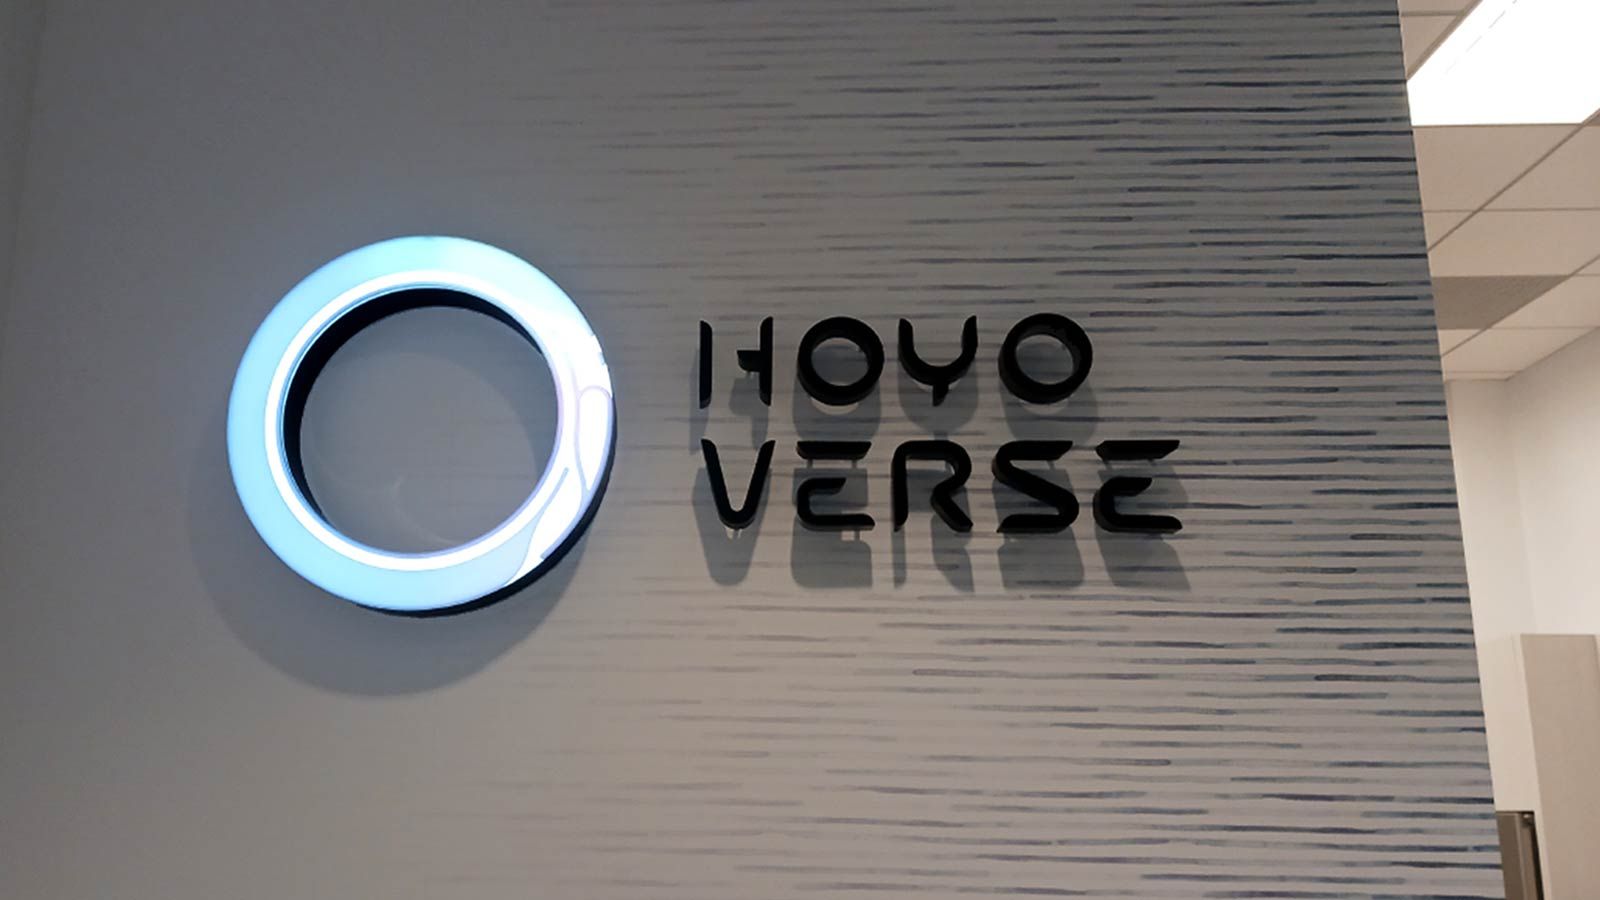 HoYoverse office sign mounted on the wall